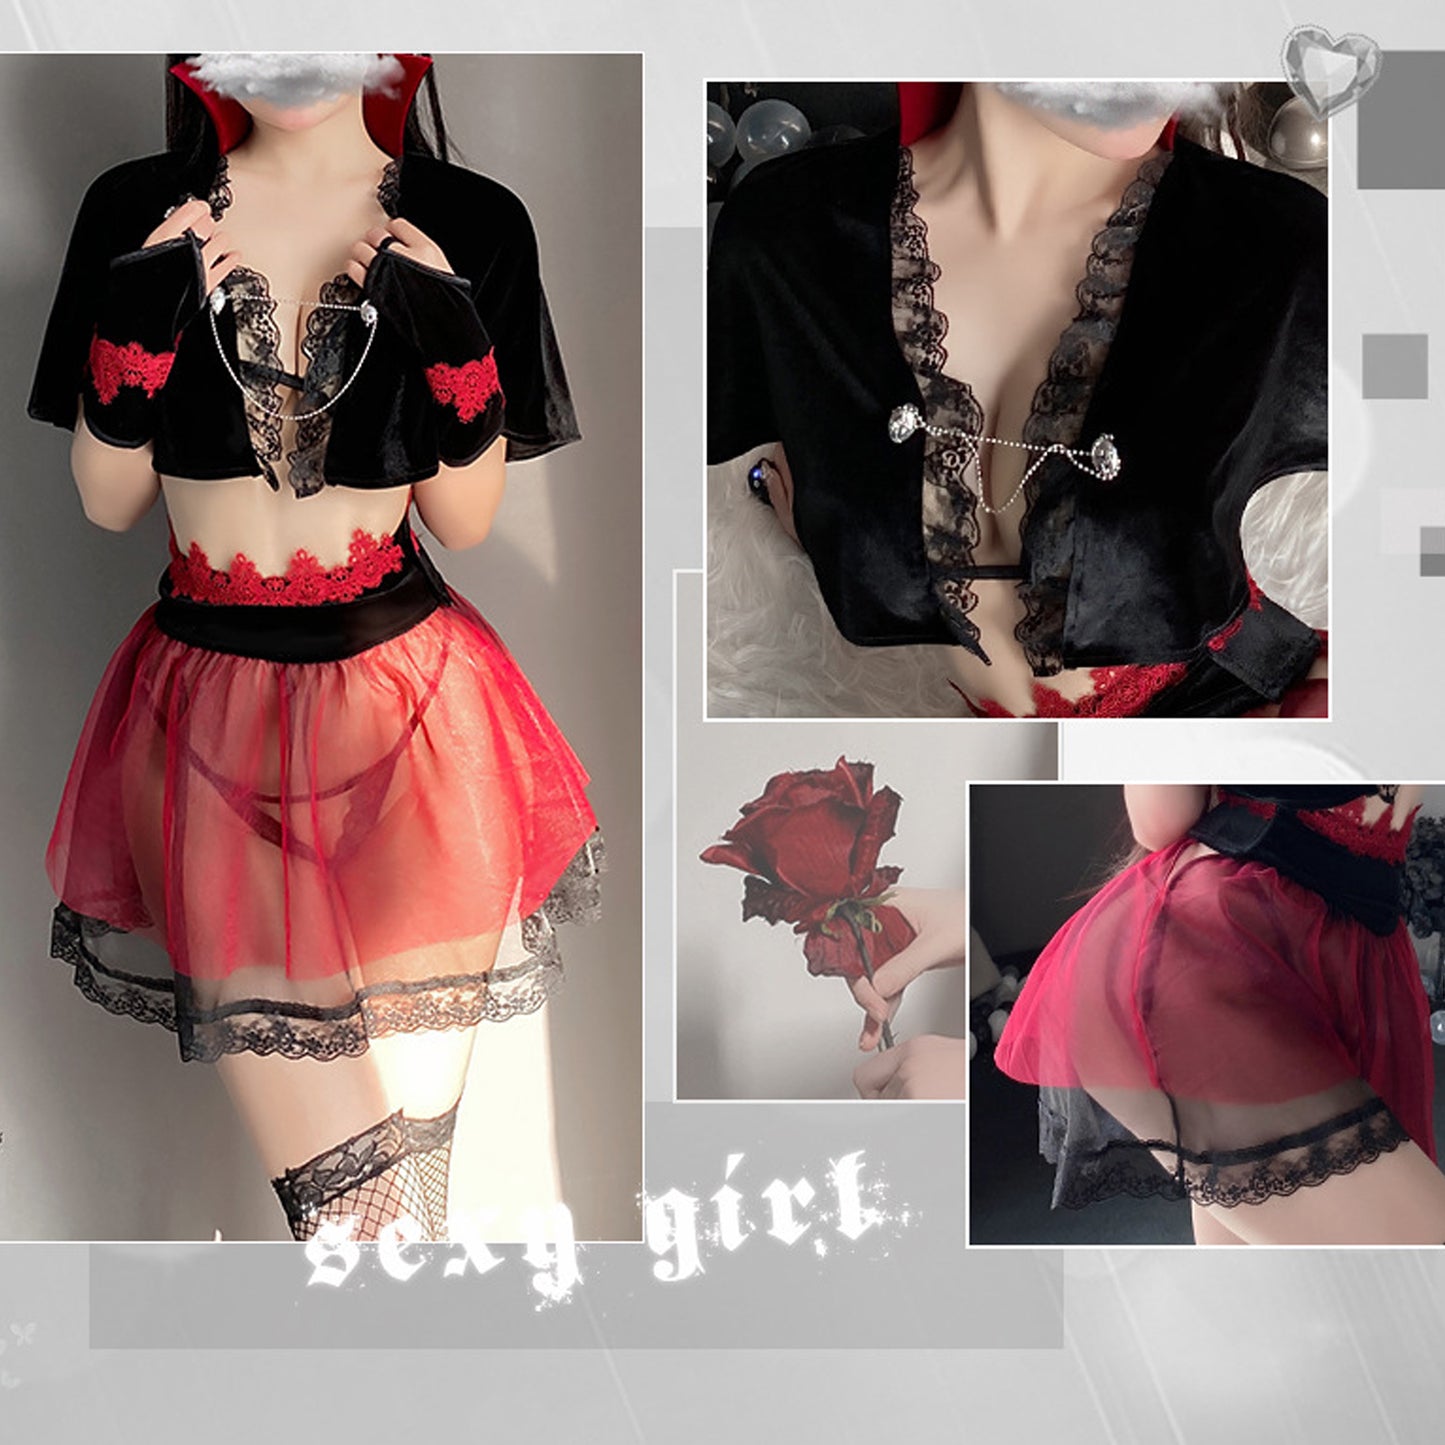 Yomorio Sexy Devil Costume Anime Demon Cospay Outfit Succubus Cosplay Lingerie Set